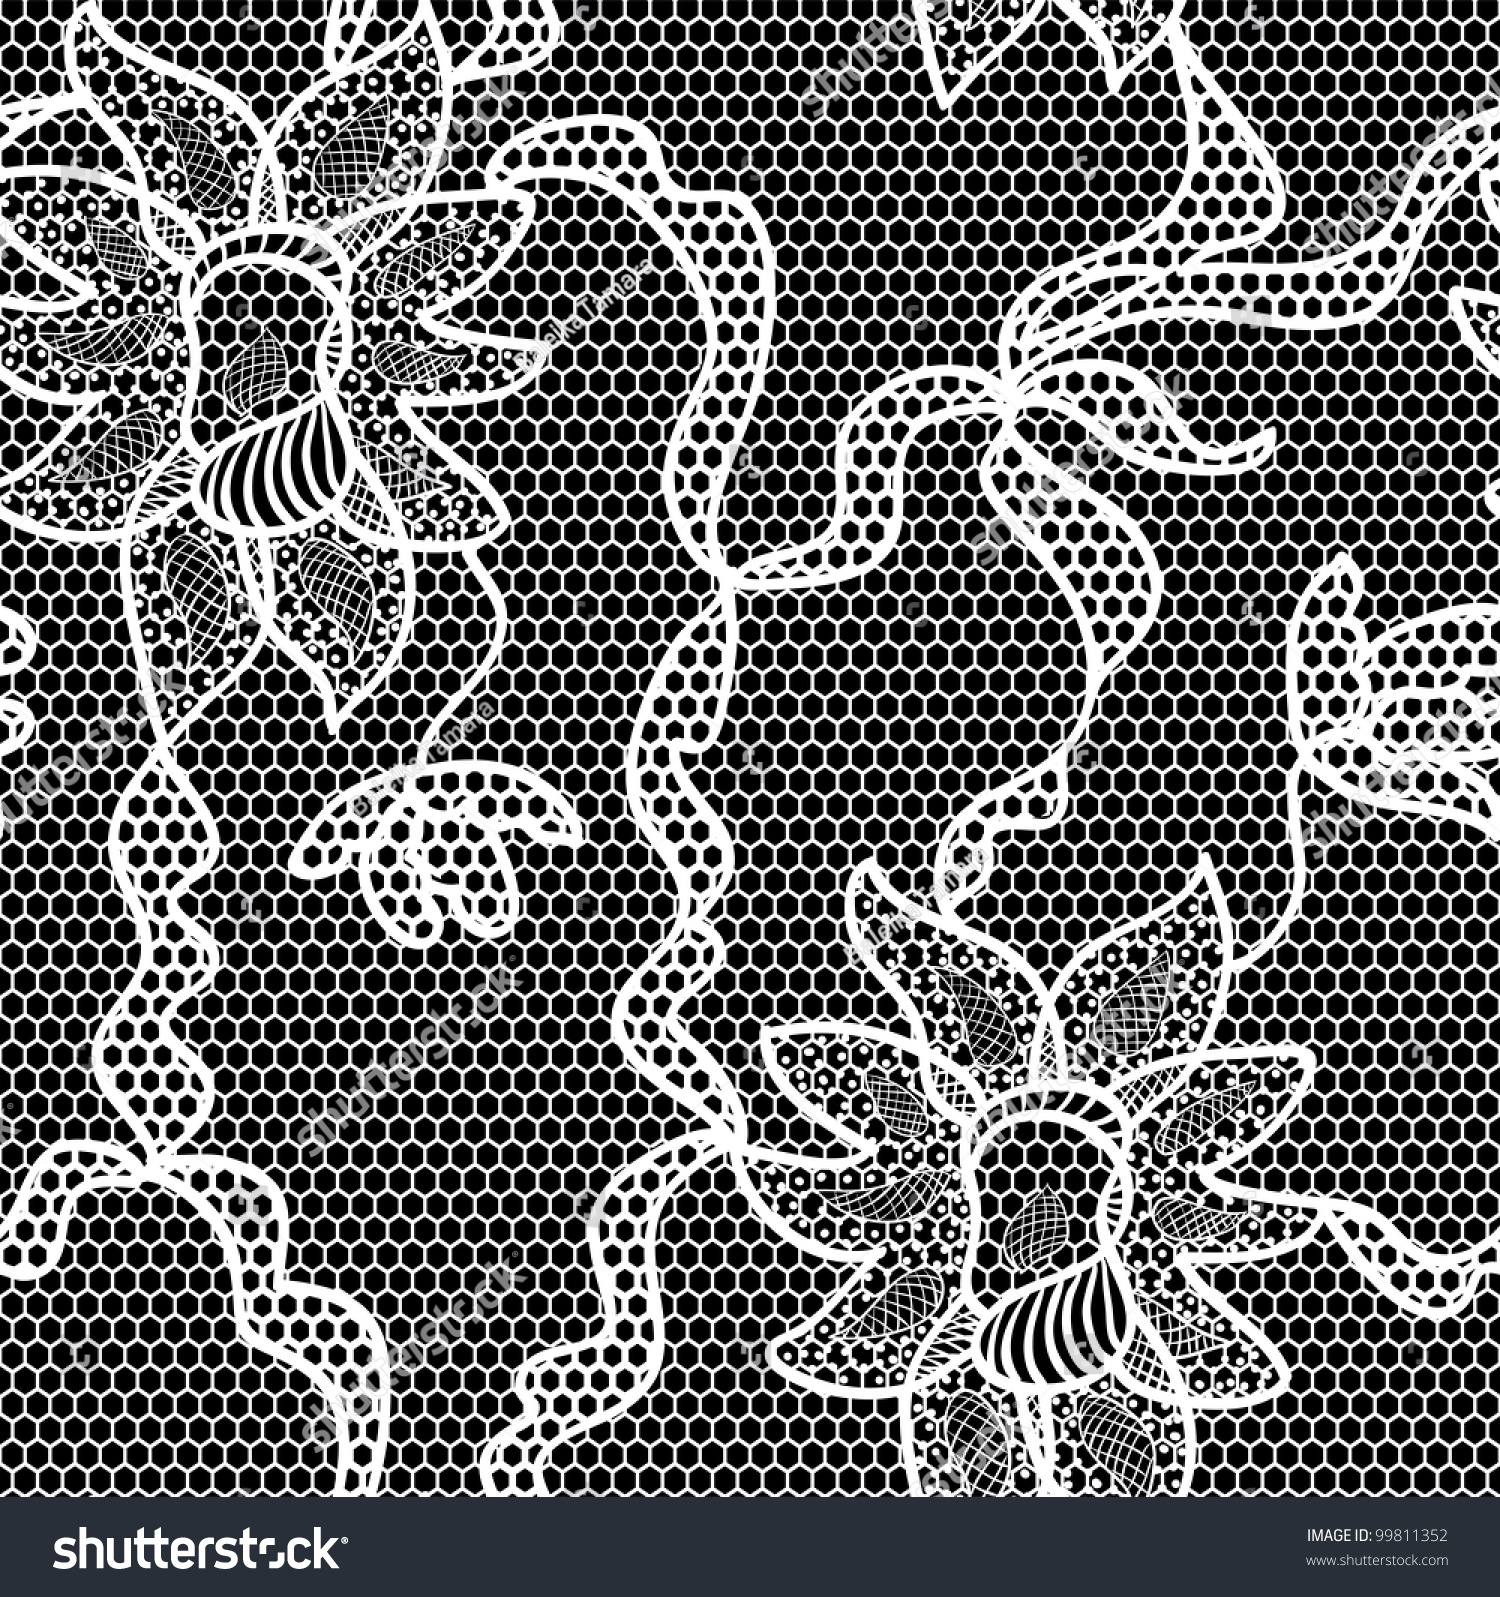 Black Lace Vector Fabric Seamless Pattern Stock Vector 99811352 ...